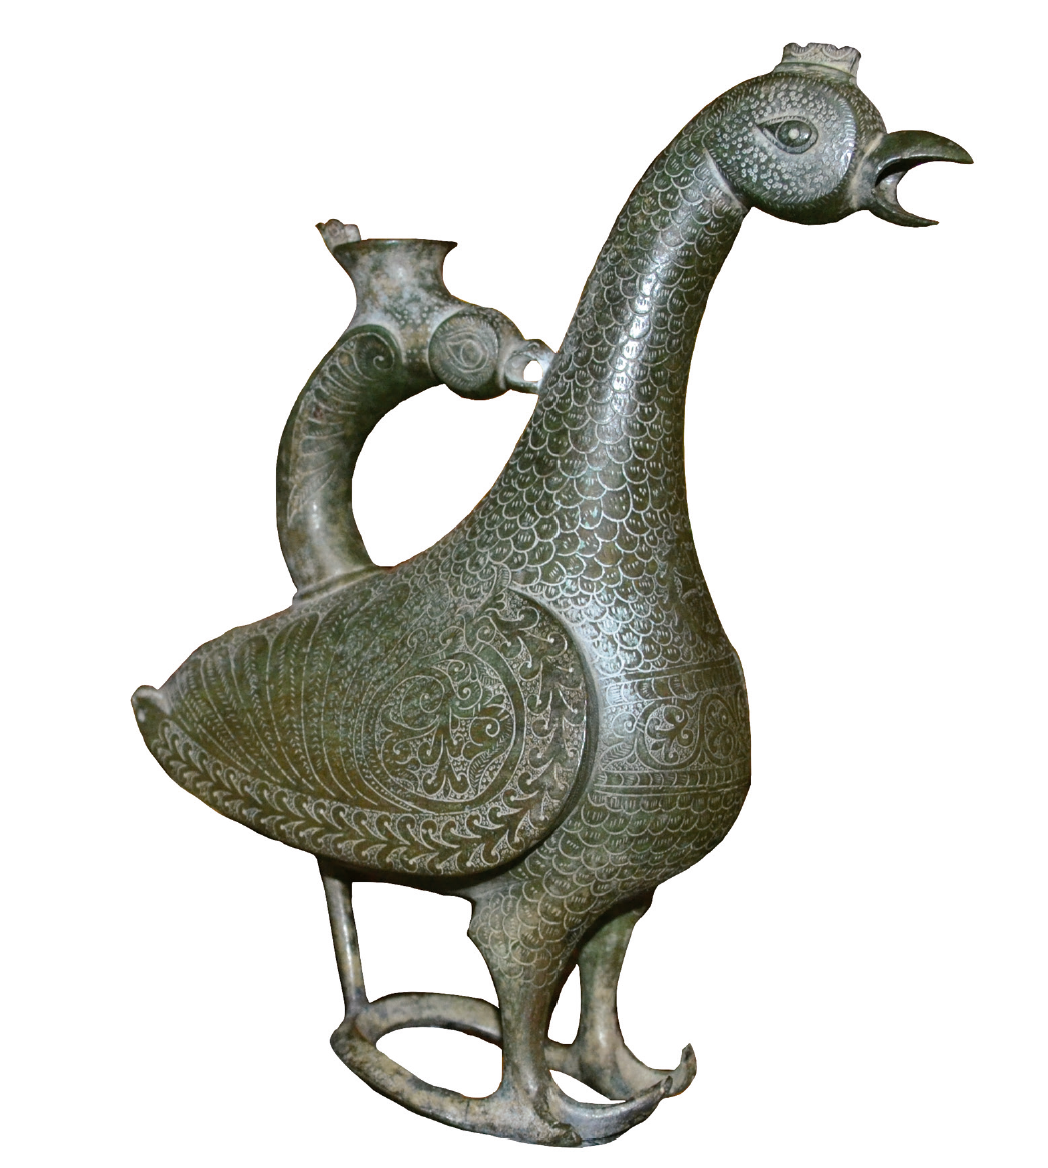 Peacock-shaped water-pourer.